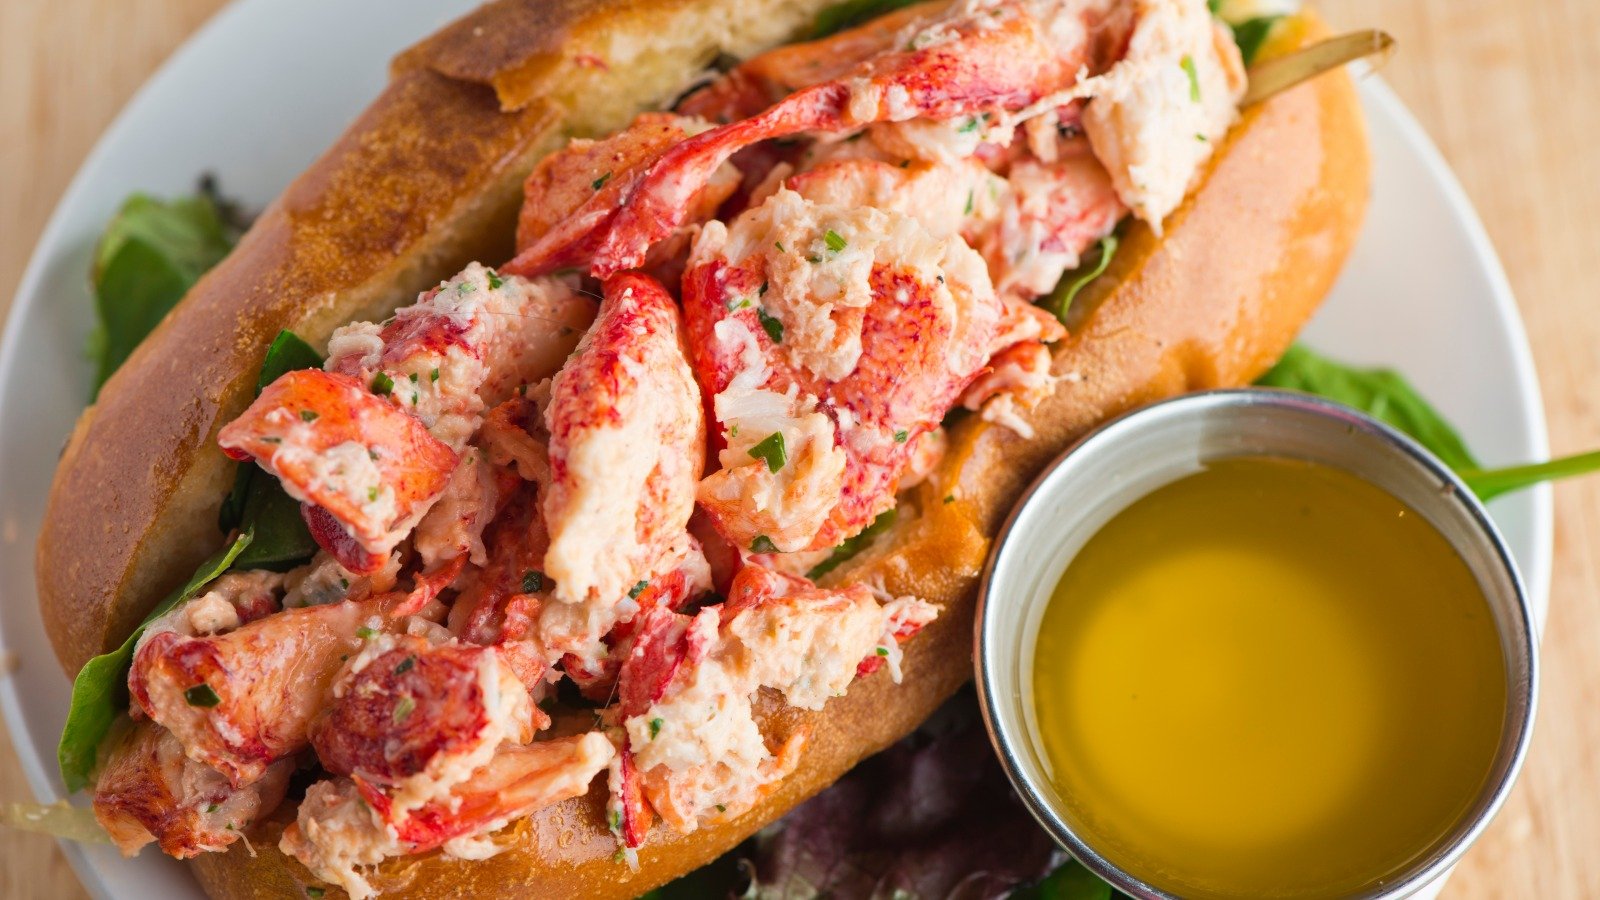 Why You Should Think Twice Before Ordering Lobster At A Fancy Restaurant